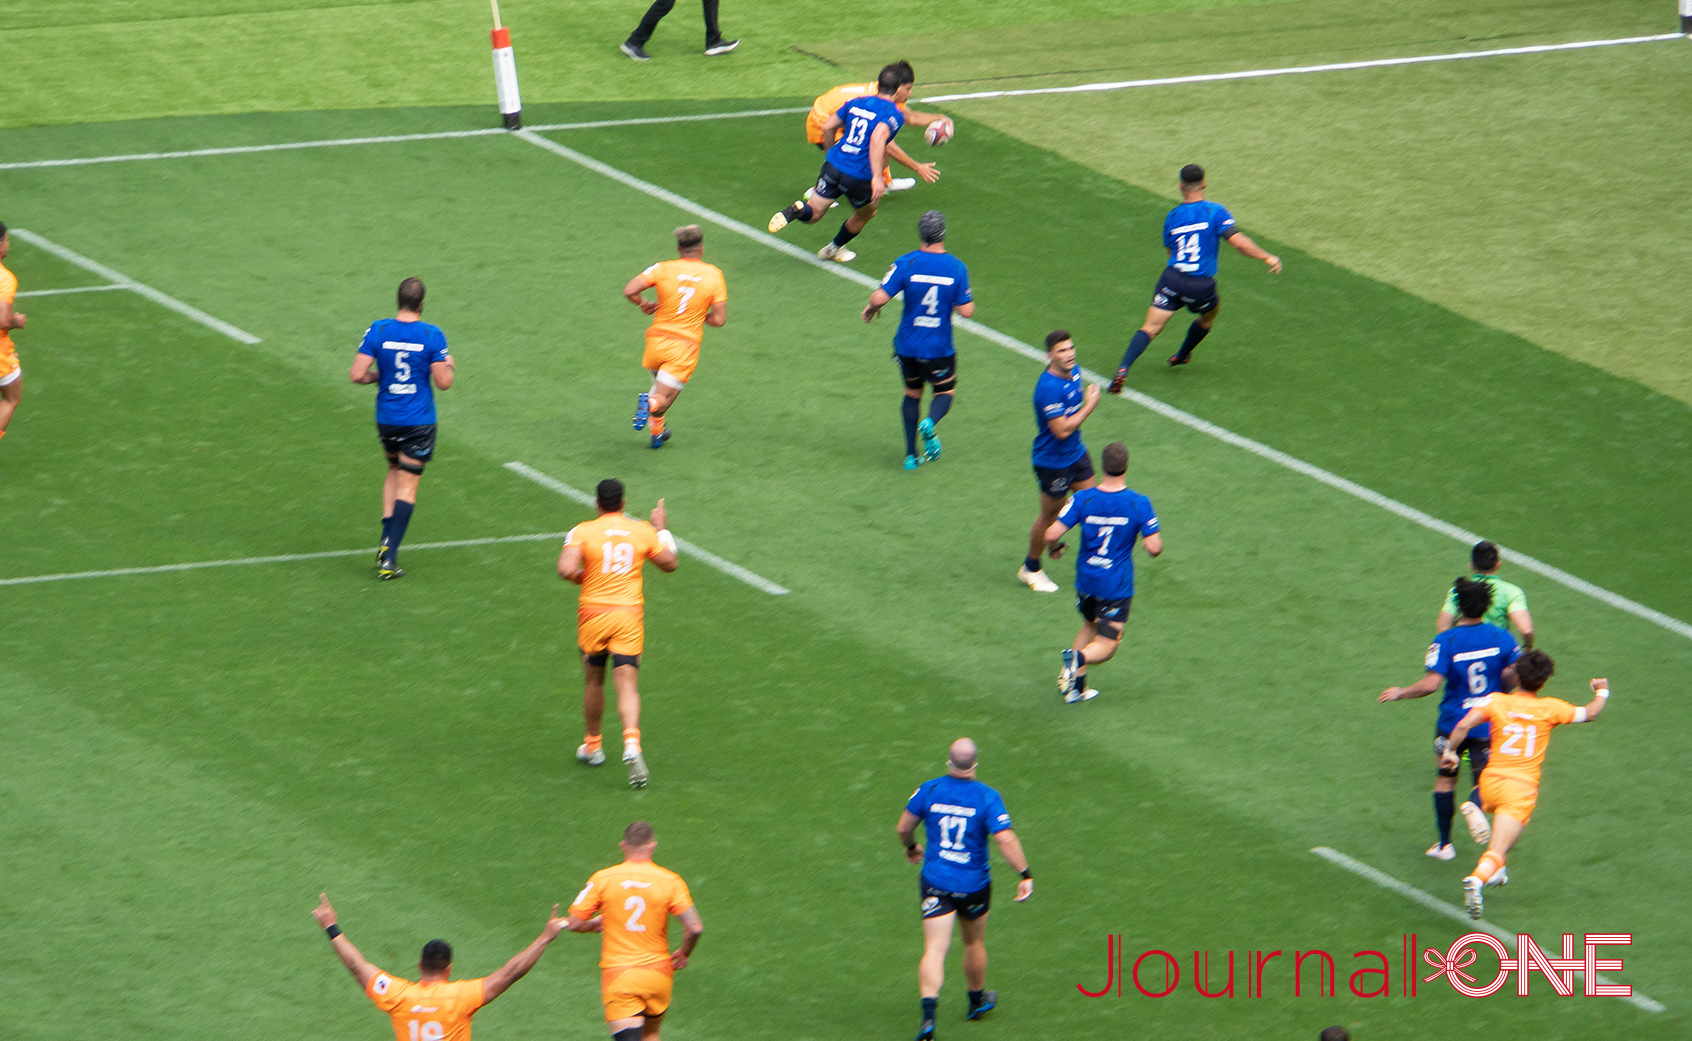 Japan Rugby League One final match, Haruto Kida (Japan rugby union team) took a kick pass from Harimichi Tachikawa(RWC2019 Japan rugby union team) and scored a try ; Photo by Journal-ONE